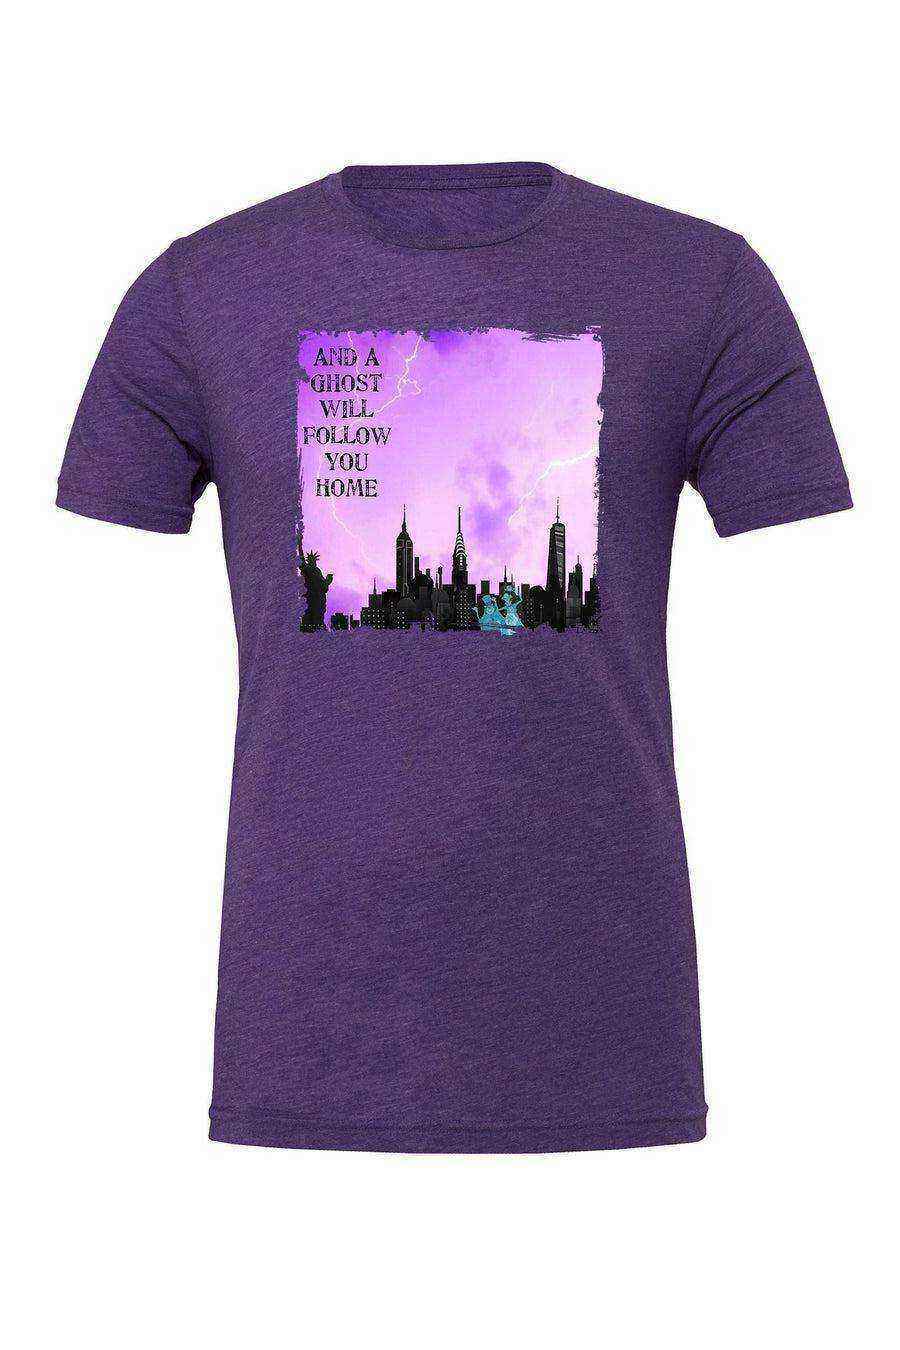 A Ghost Will Follow You Home (New York) Shirt | Haunted Mansion Shirt - Dylan's Tees